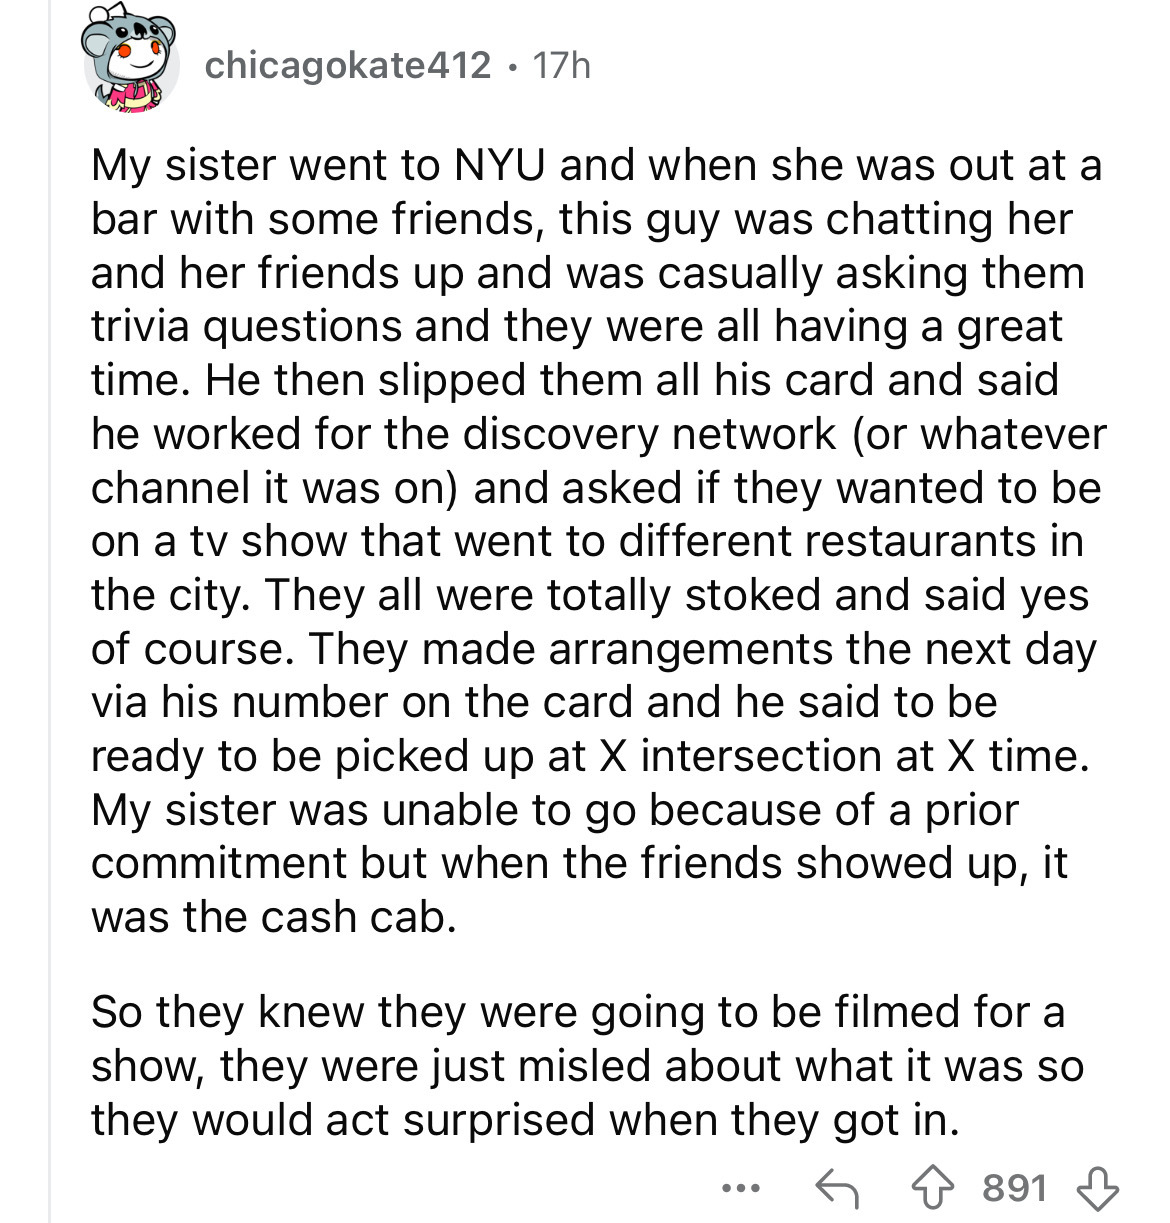 document - chicagokate412 17h My sister went to Nyu and when she was out at a bar with some friends, this guy was chatting her and her friends up and was casually asking them trivia questions and they were all having a great time. He then slipped them all